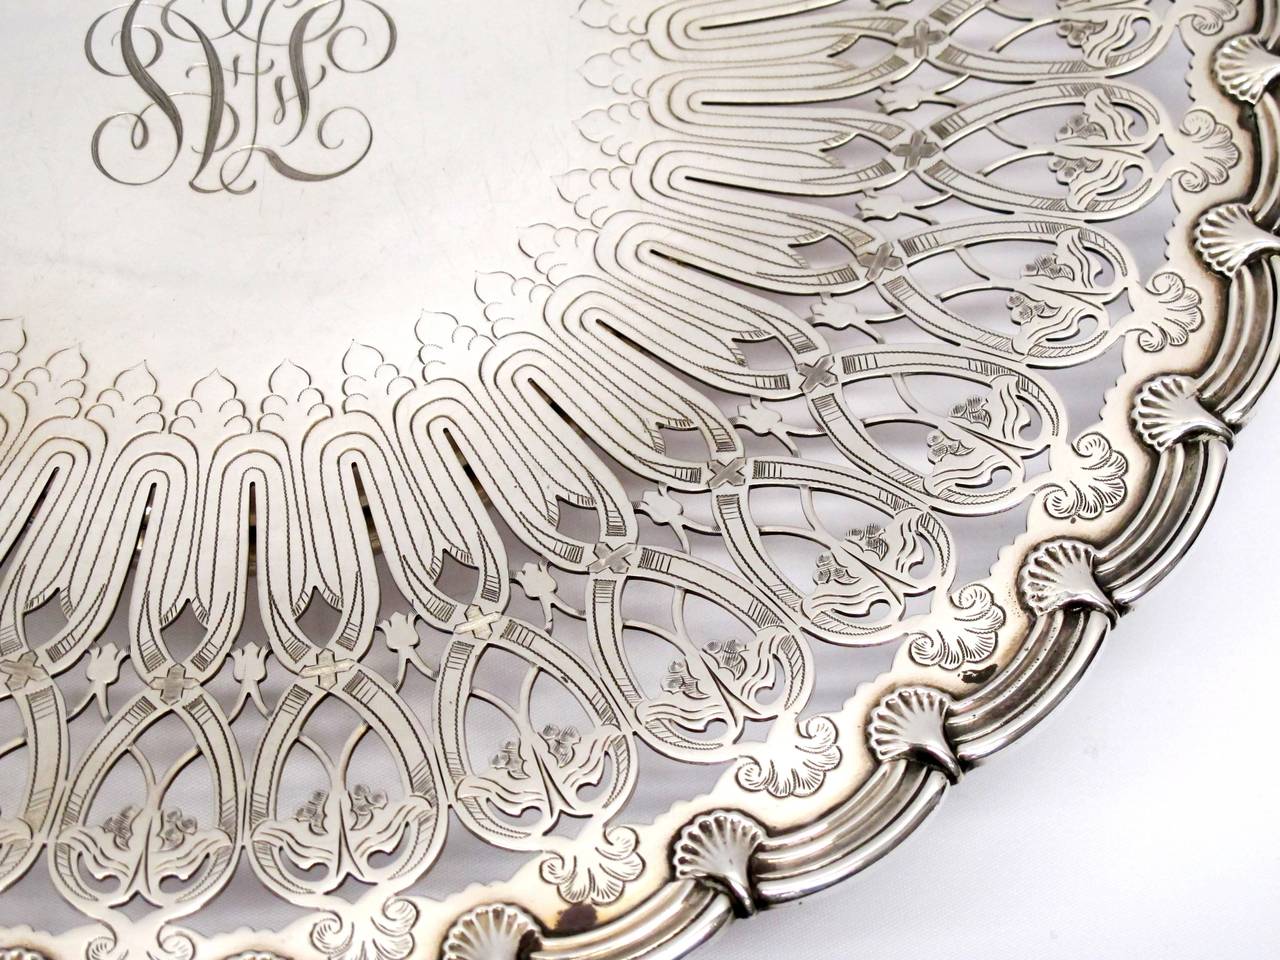 Tiffany & Co. Pierced and Engraved Footed Sterling Silver Tray In Excellent Condition For Sale In Santa Fe, NM